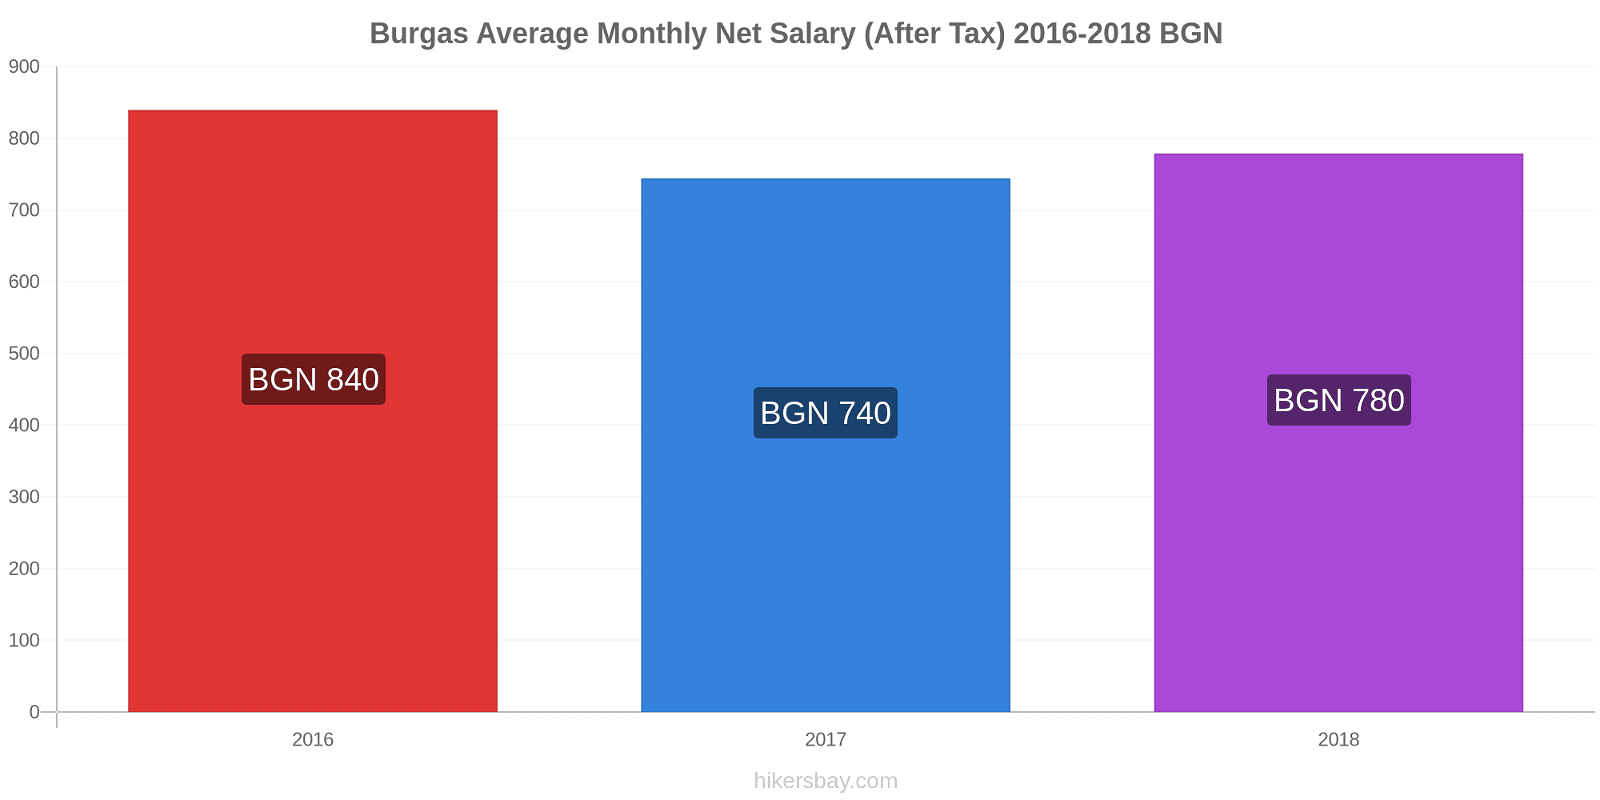 Burgas price changes Average Monthly Net Salary (After Tax) hikersbay.com